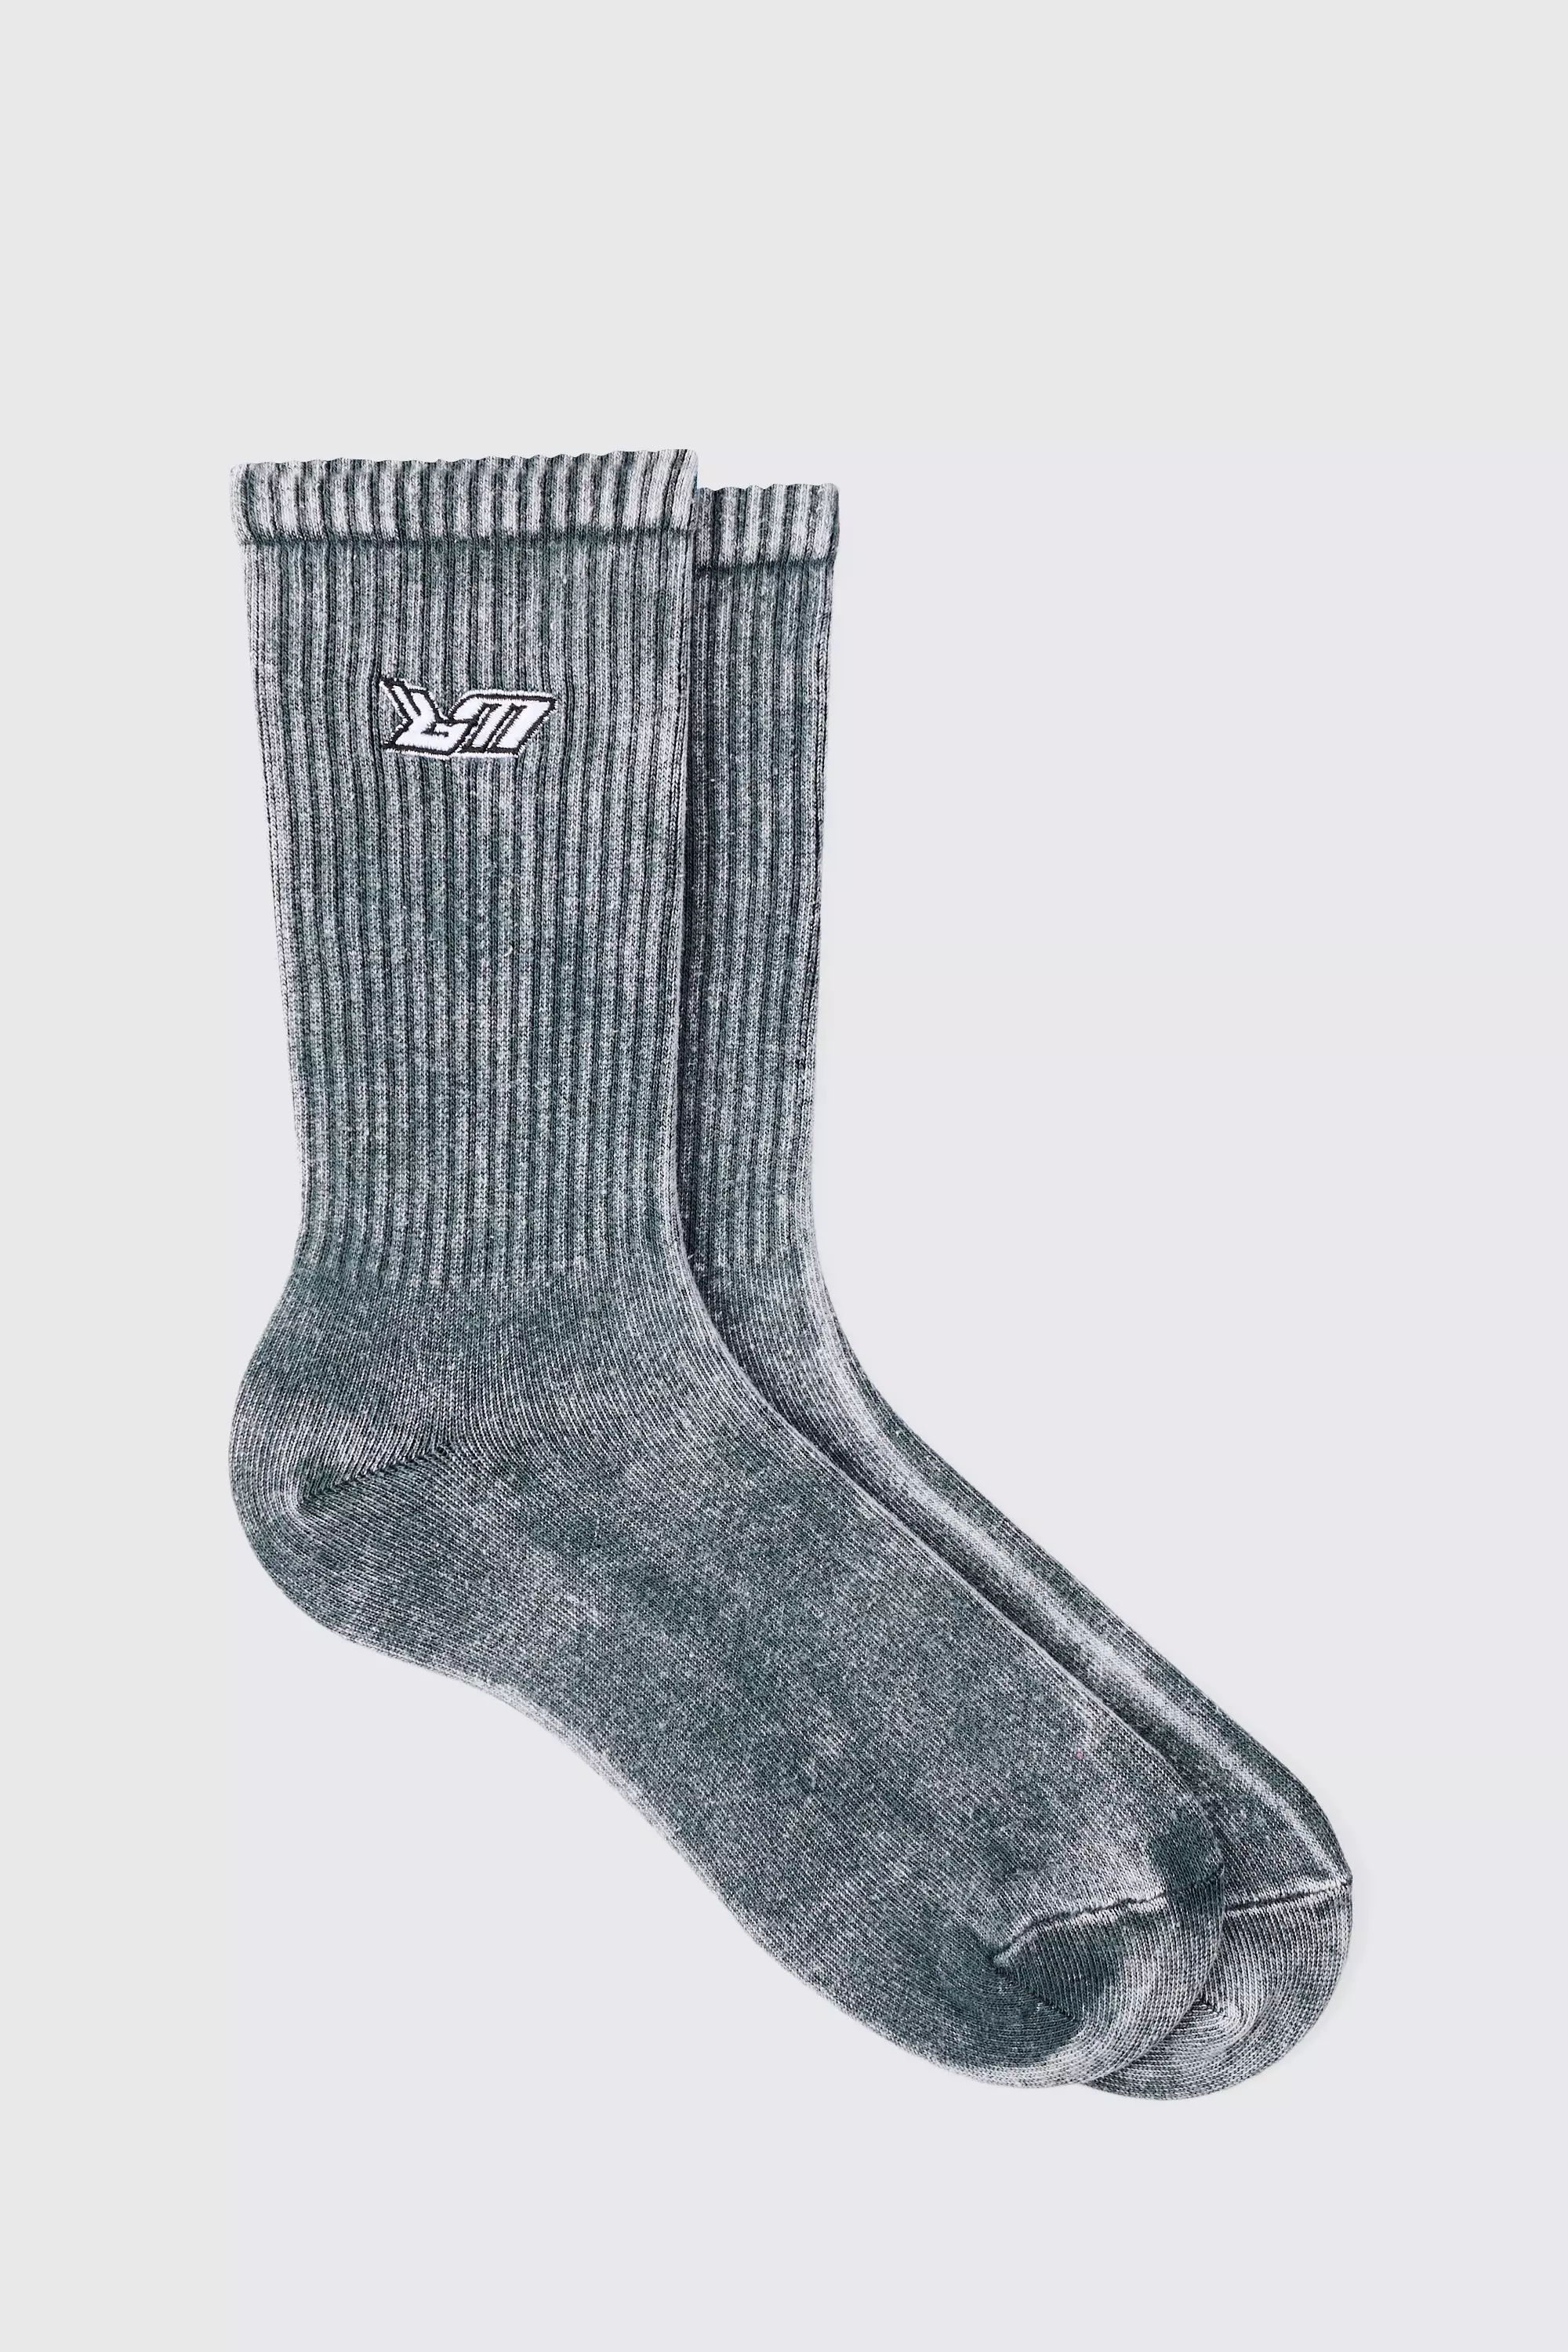 Acid Wash Bm Embroidered Socks In Charcoal Charcoal